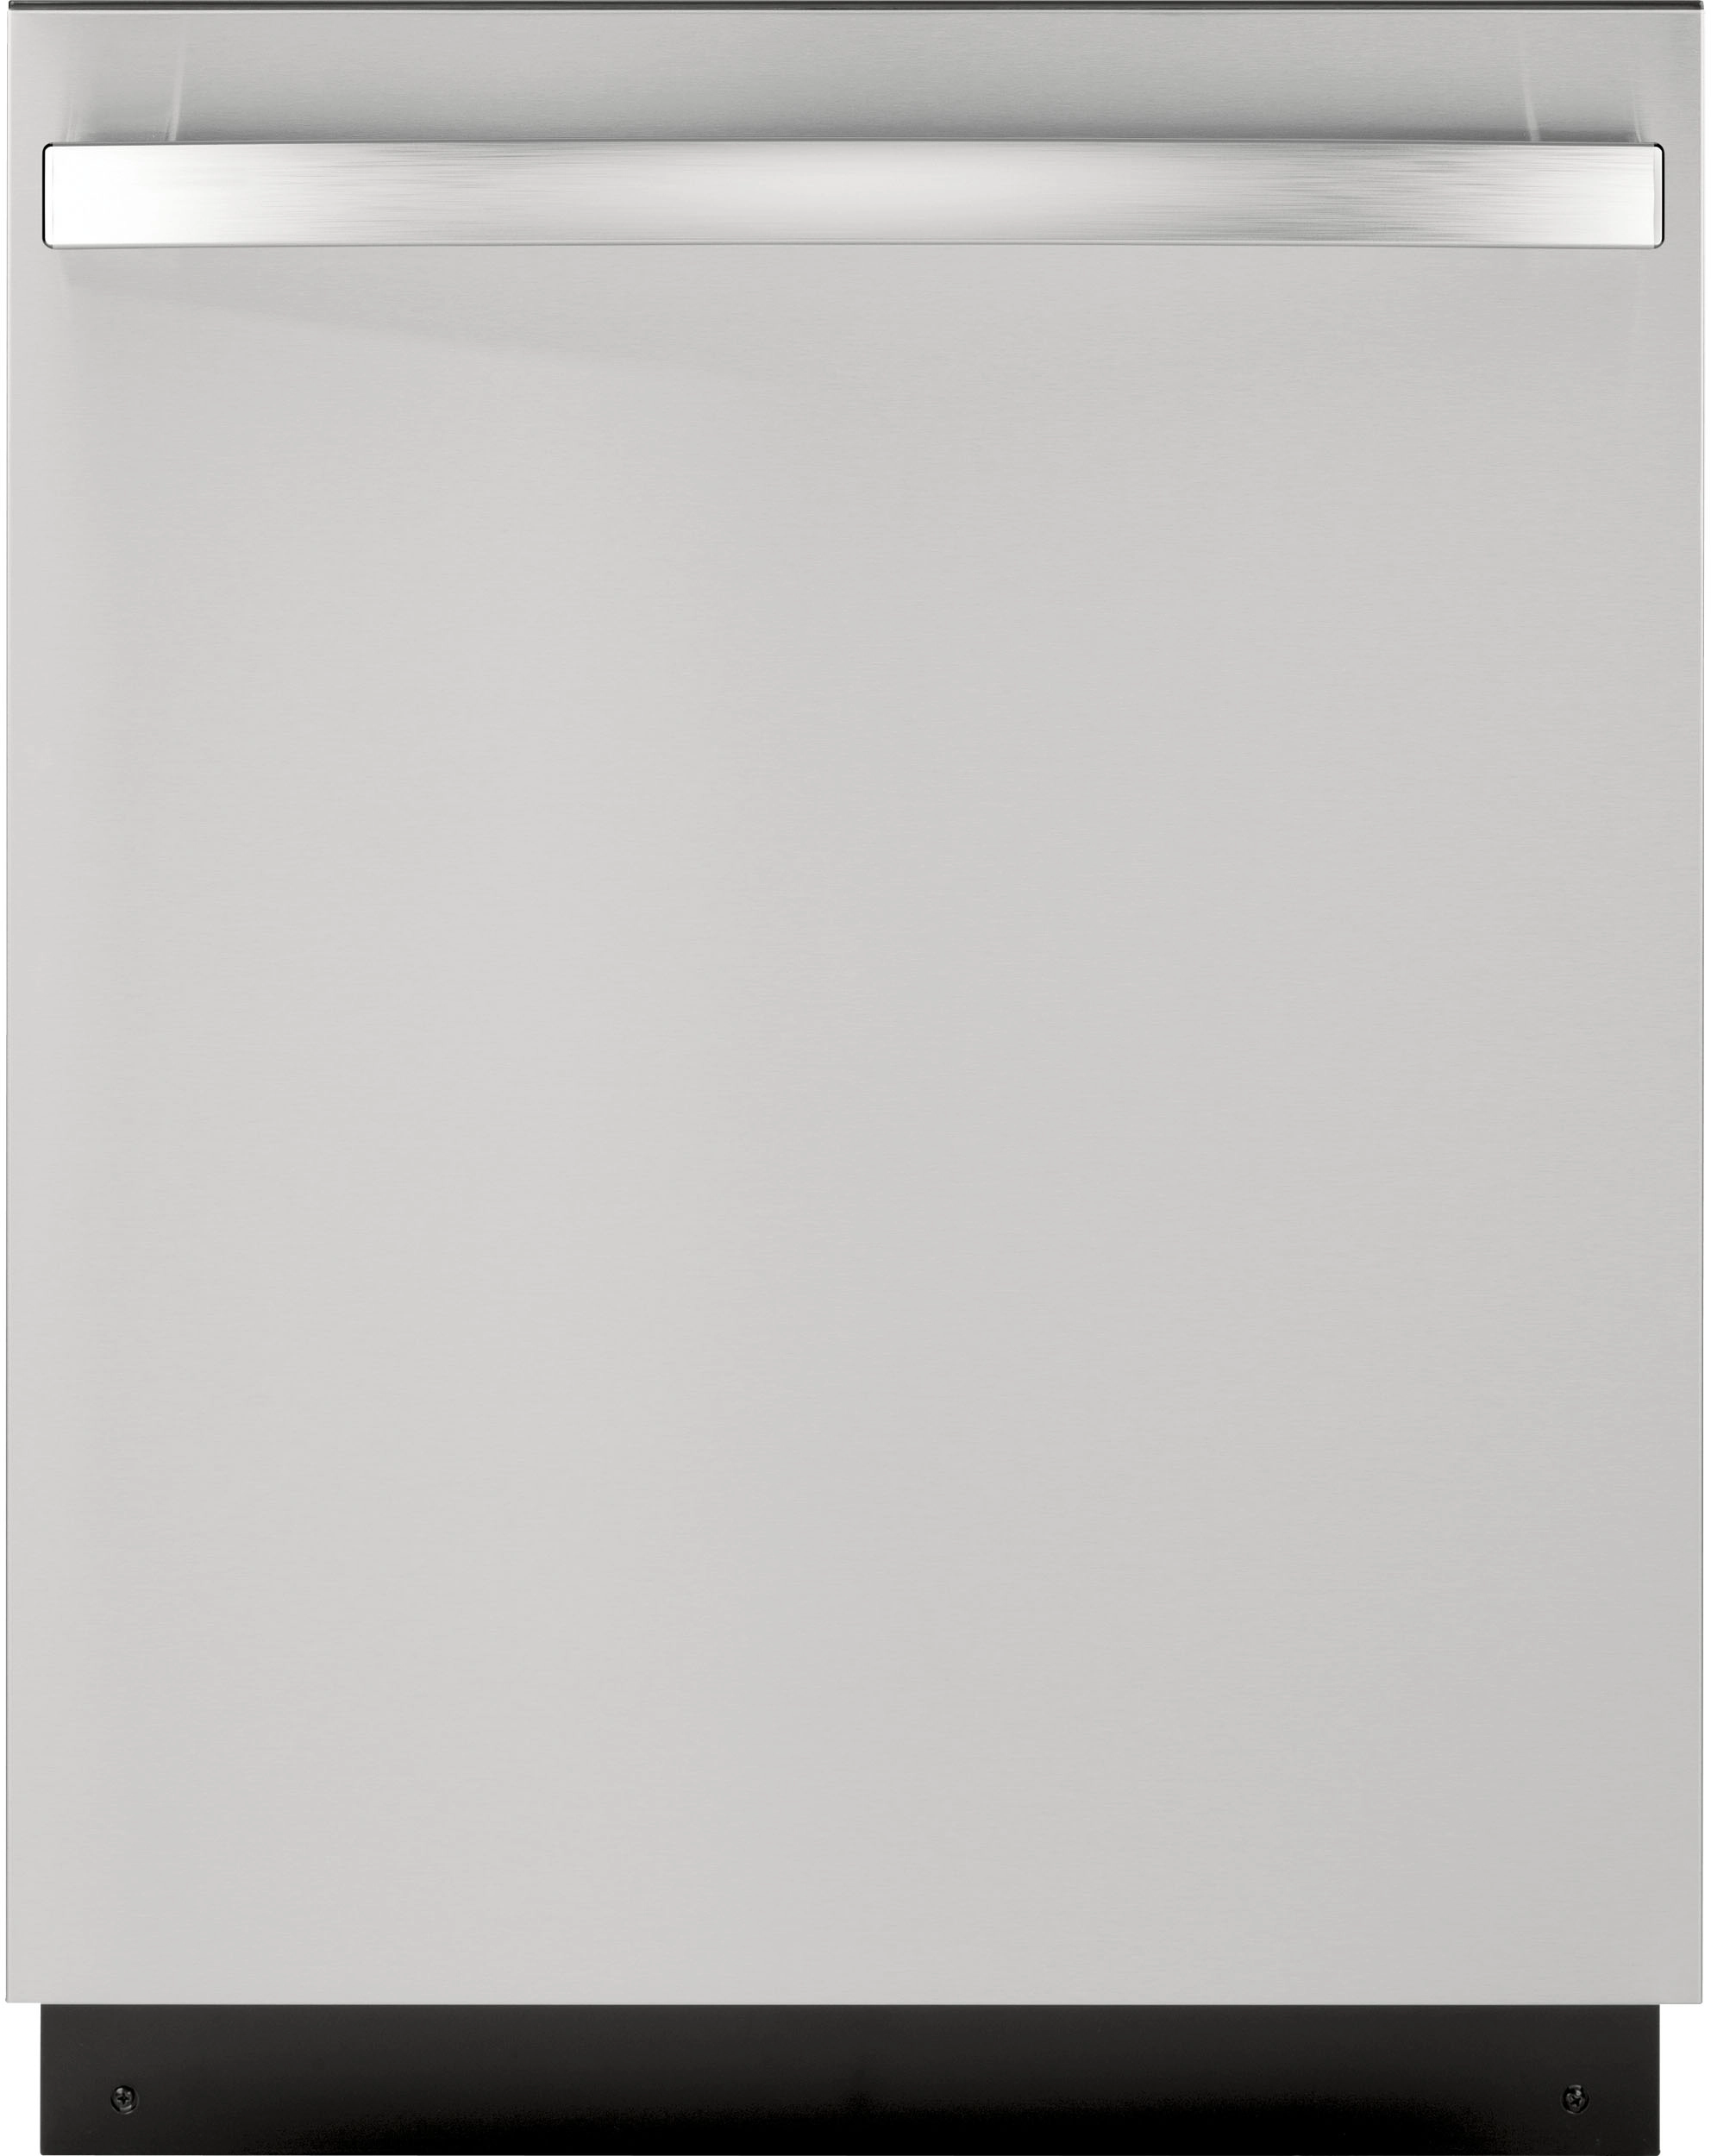 General Electric 24 Inch Built-In Dishwasher with Stainless Steel Interior